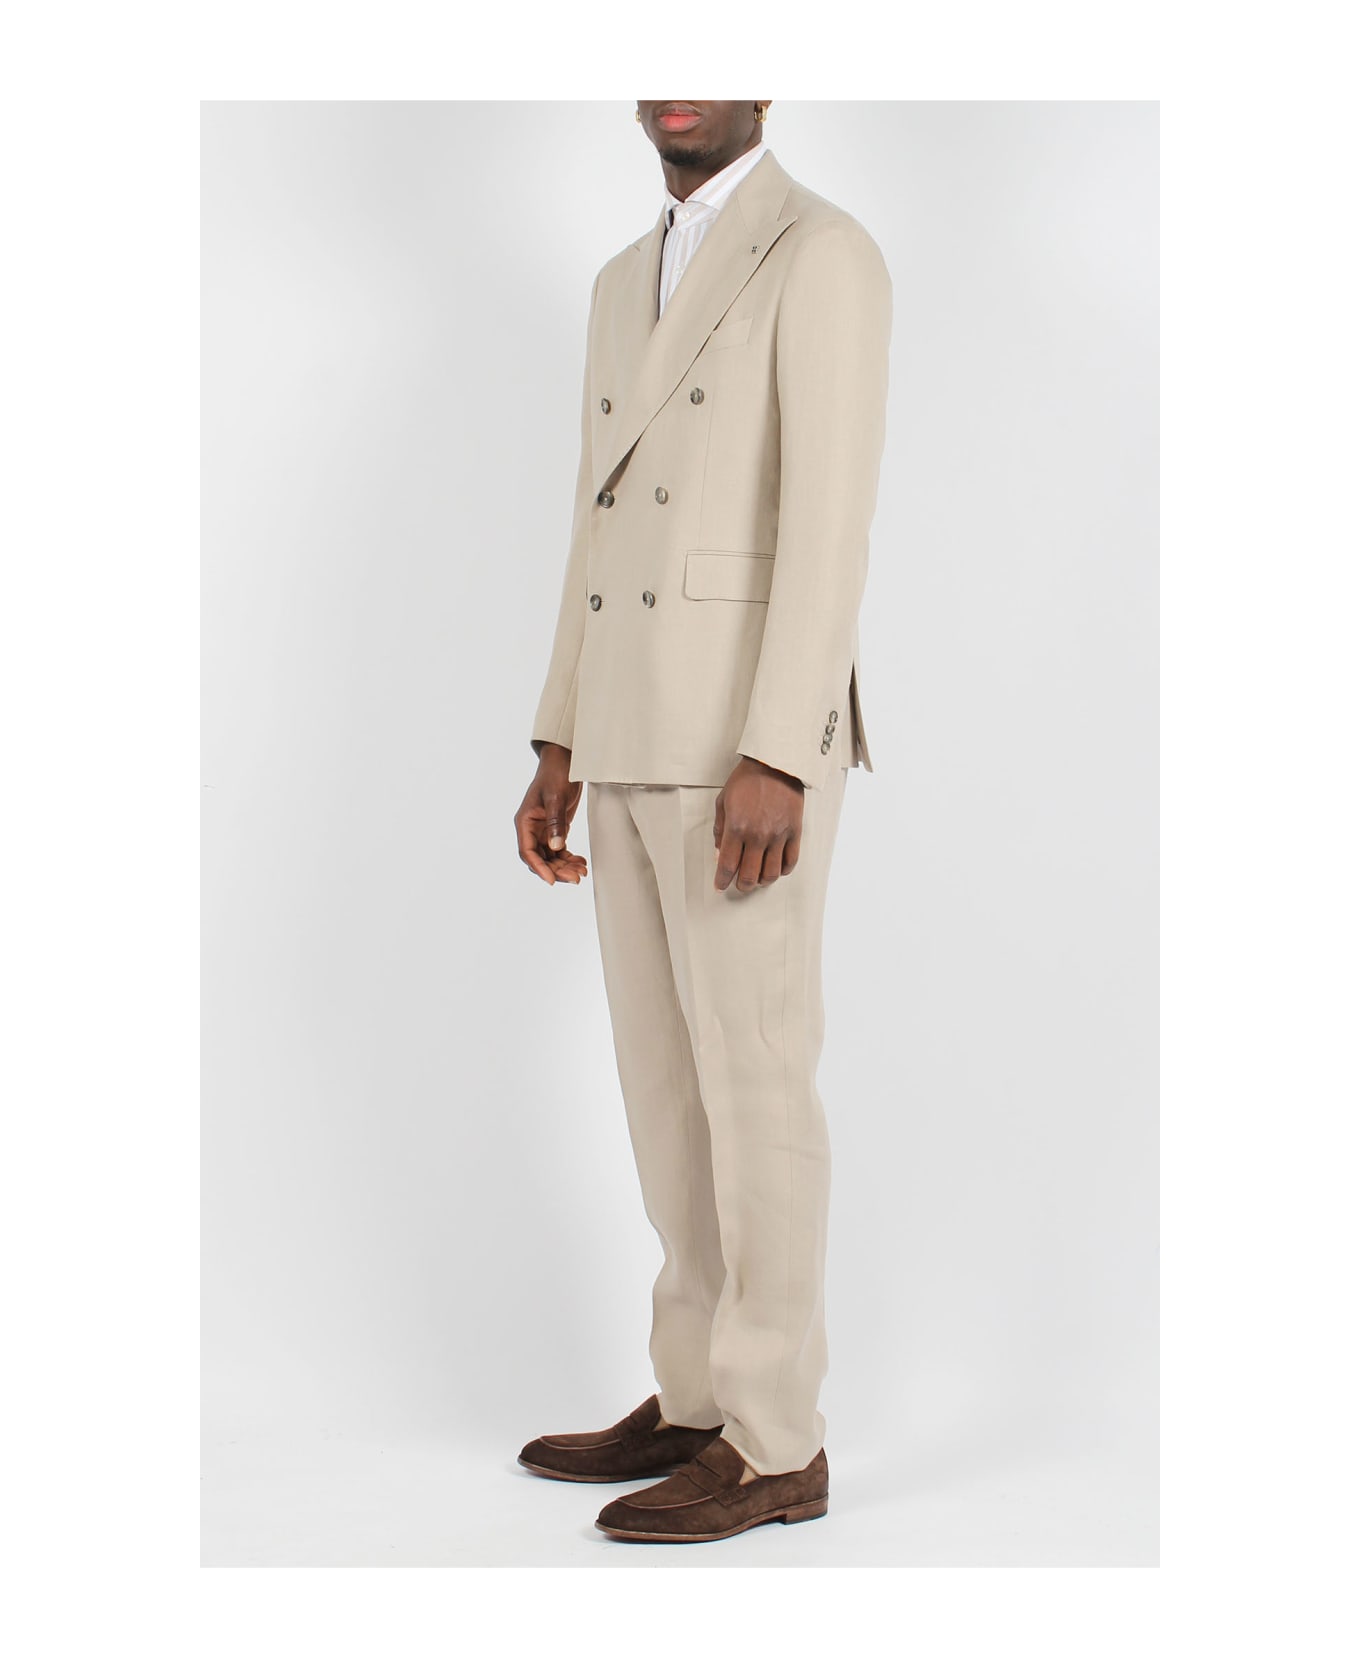 Tagliatore Linen Double-breasted Tailored Suit - Nude & Neutrals